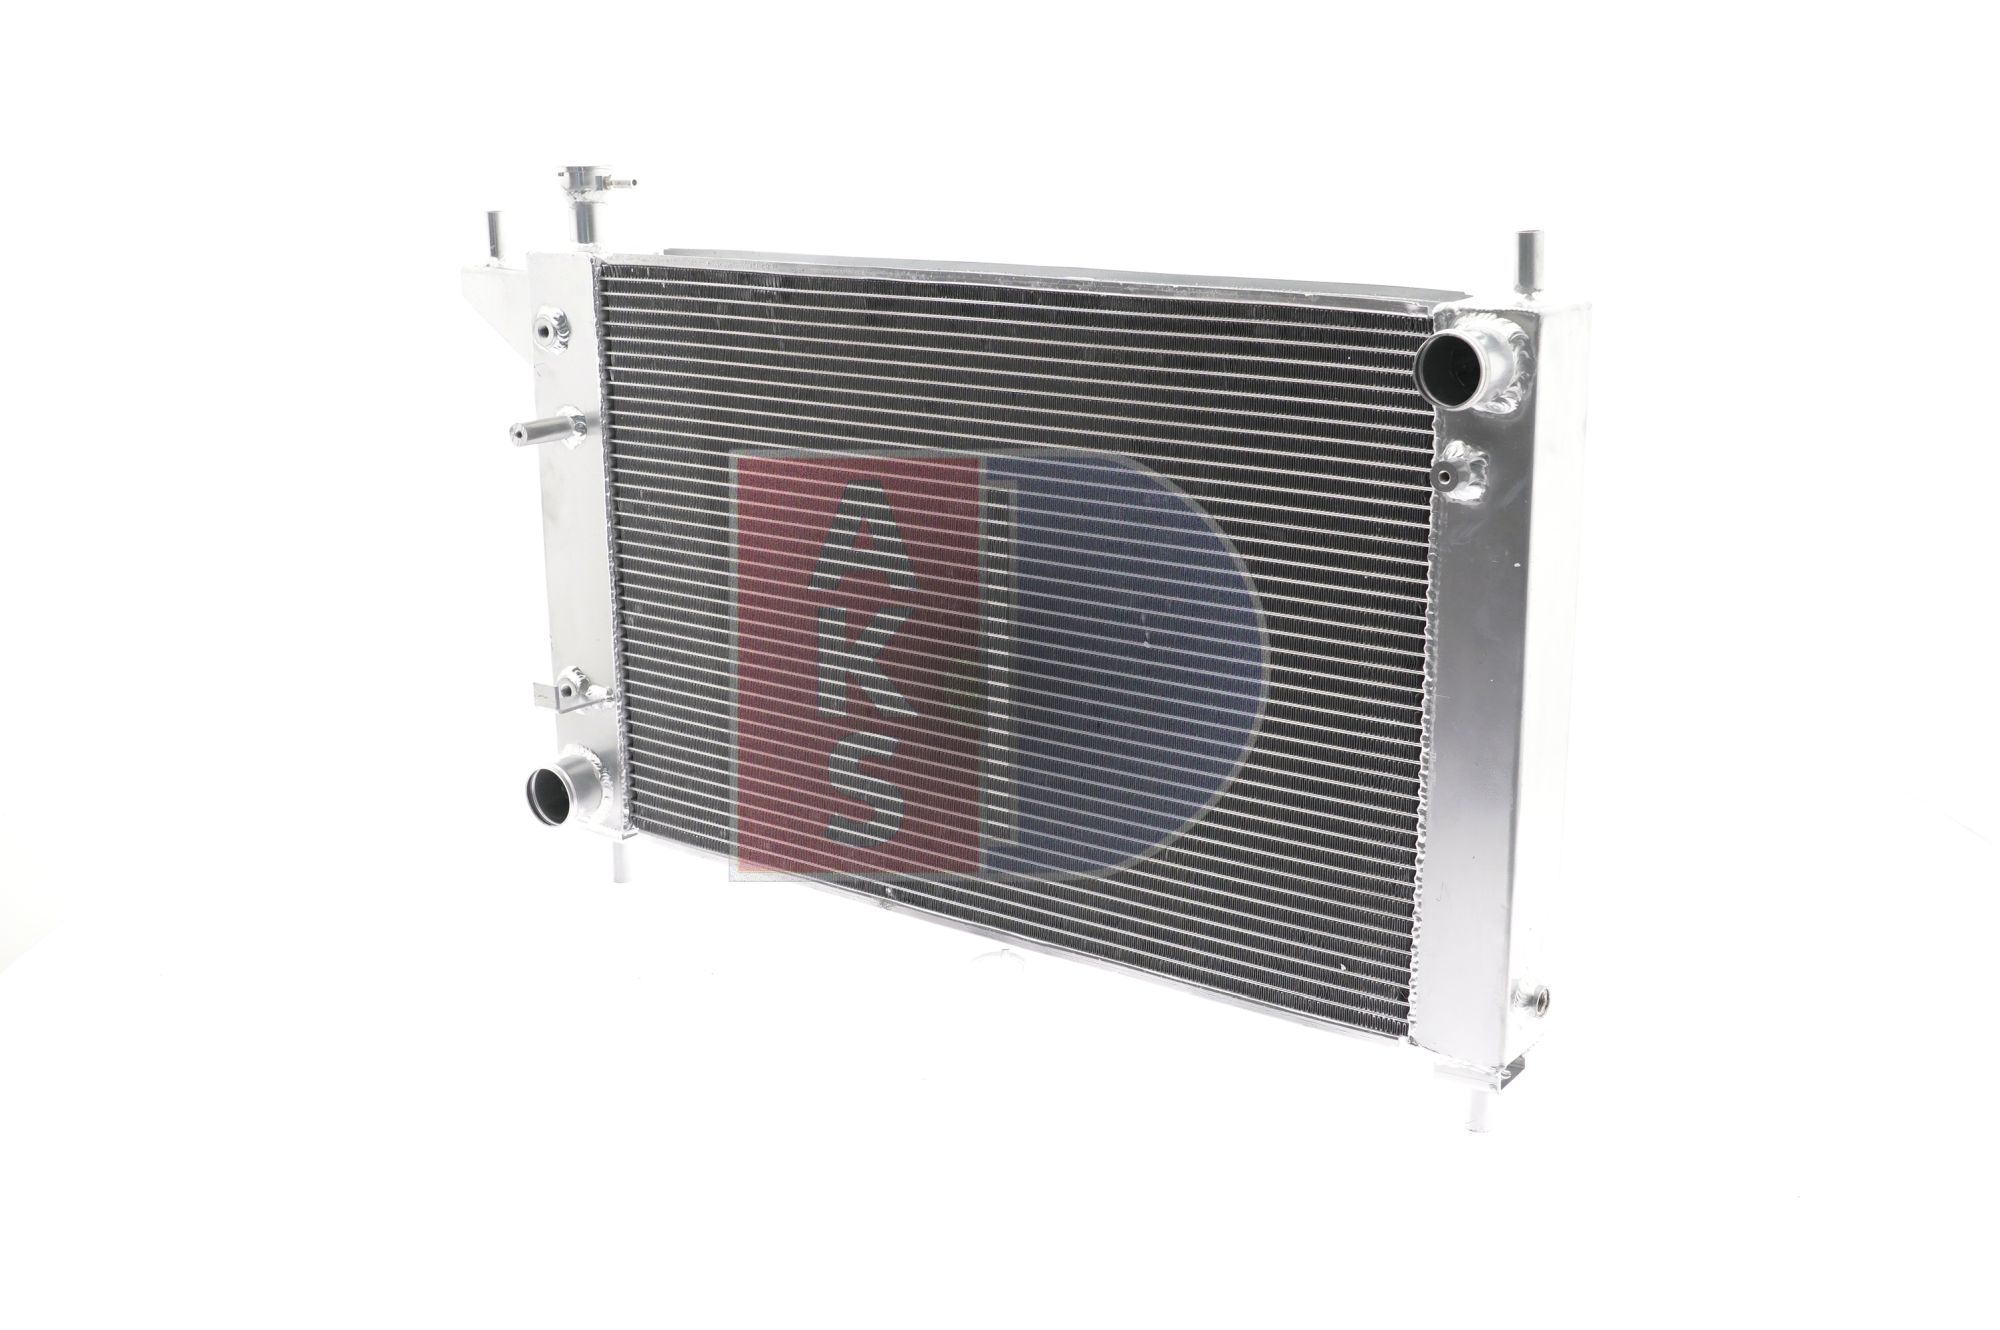 AKS DASIS Aluminium, for vehicles with/without air conditioning, 609 x 398 x 50 mm, Manual Transmission, Brazed cooling fins Radiator 090138AL buy